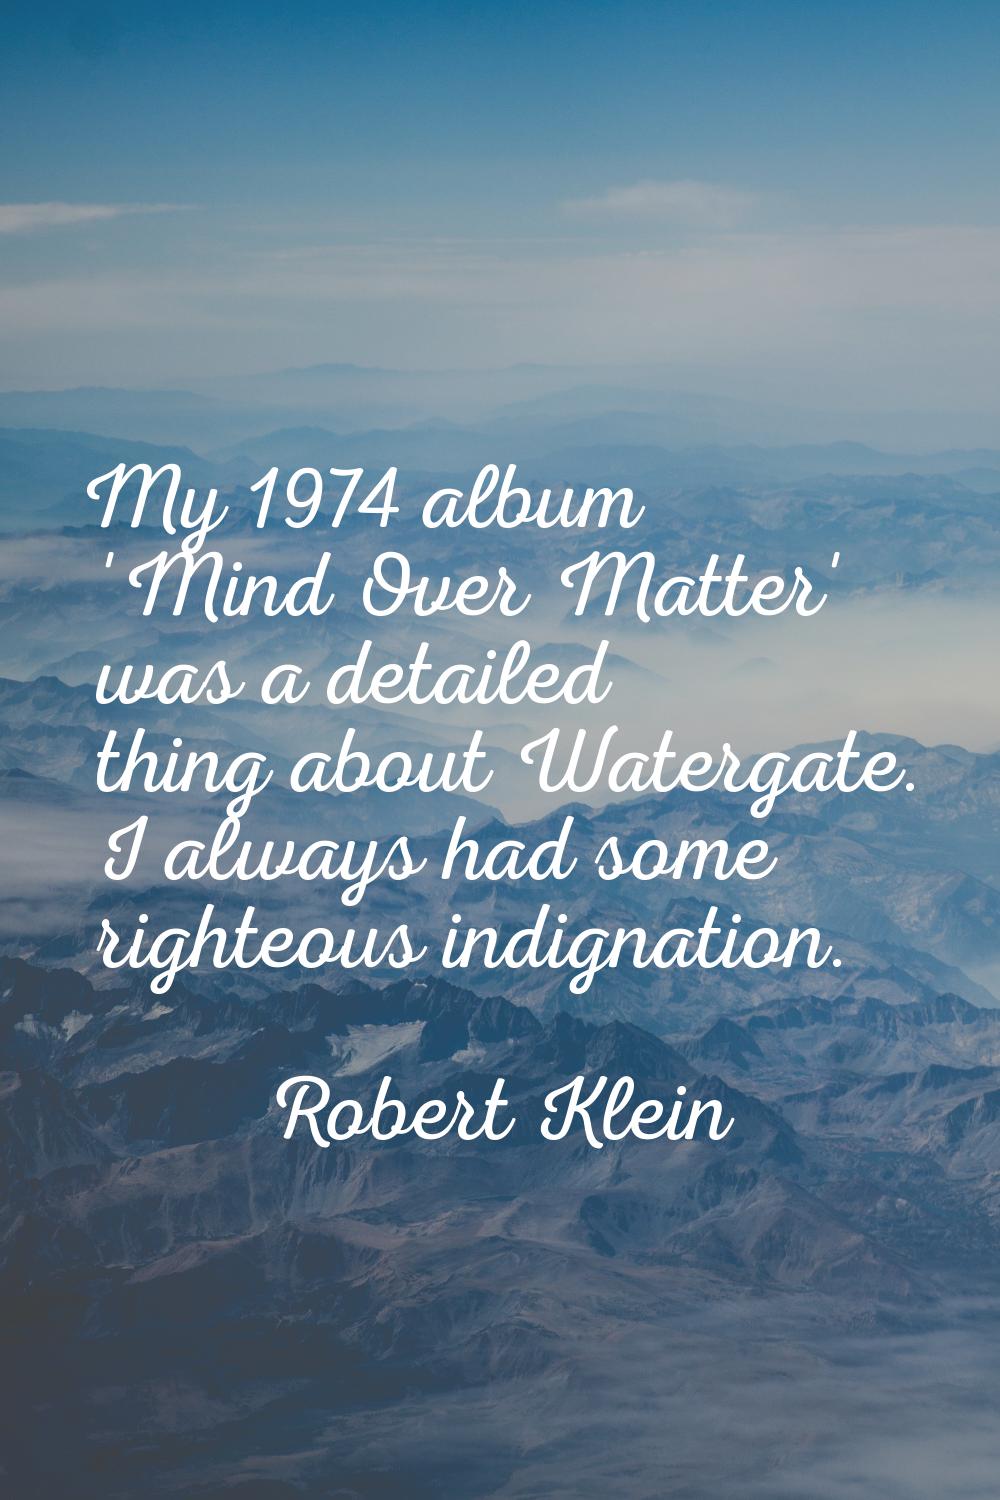 My 1974 album 'Mind Over Matter' was a detailed thing about Watergate. I always had some righteous 